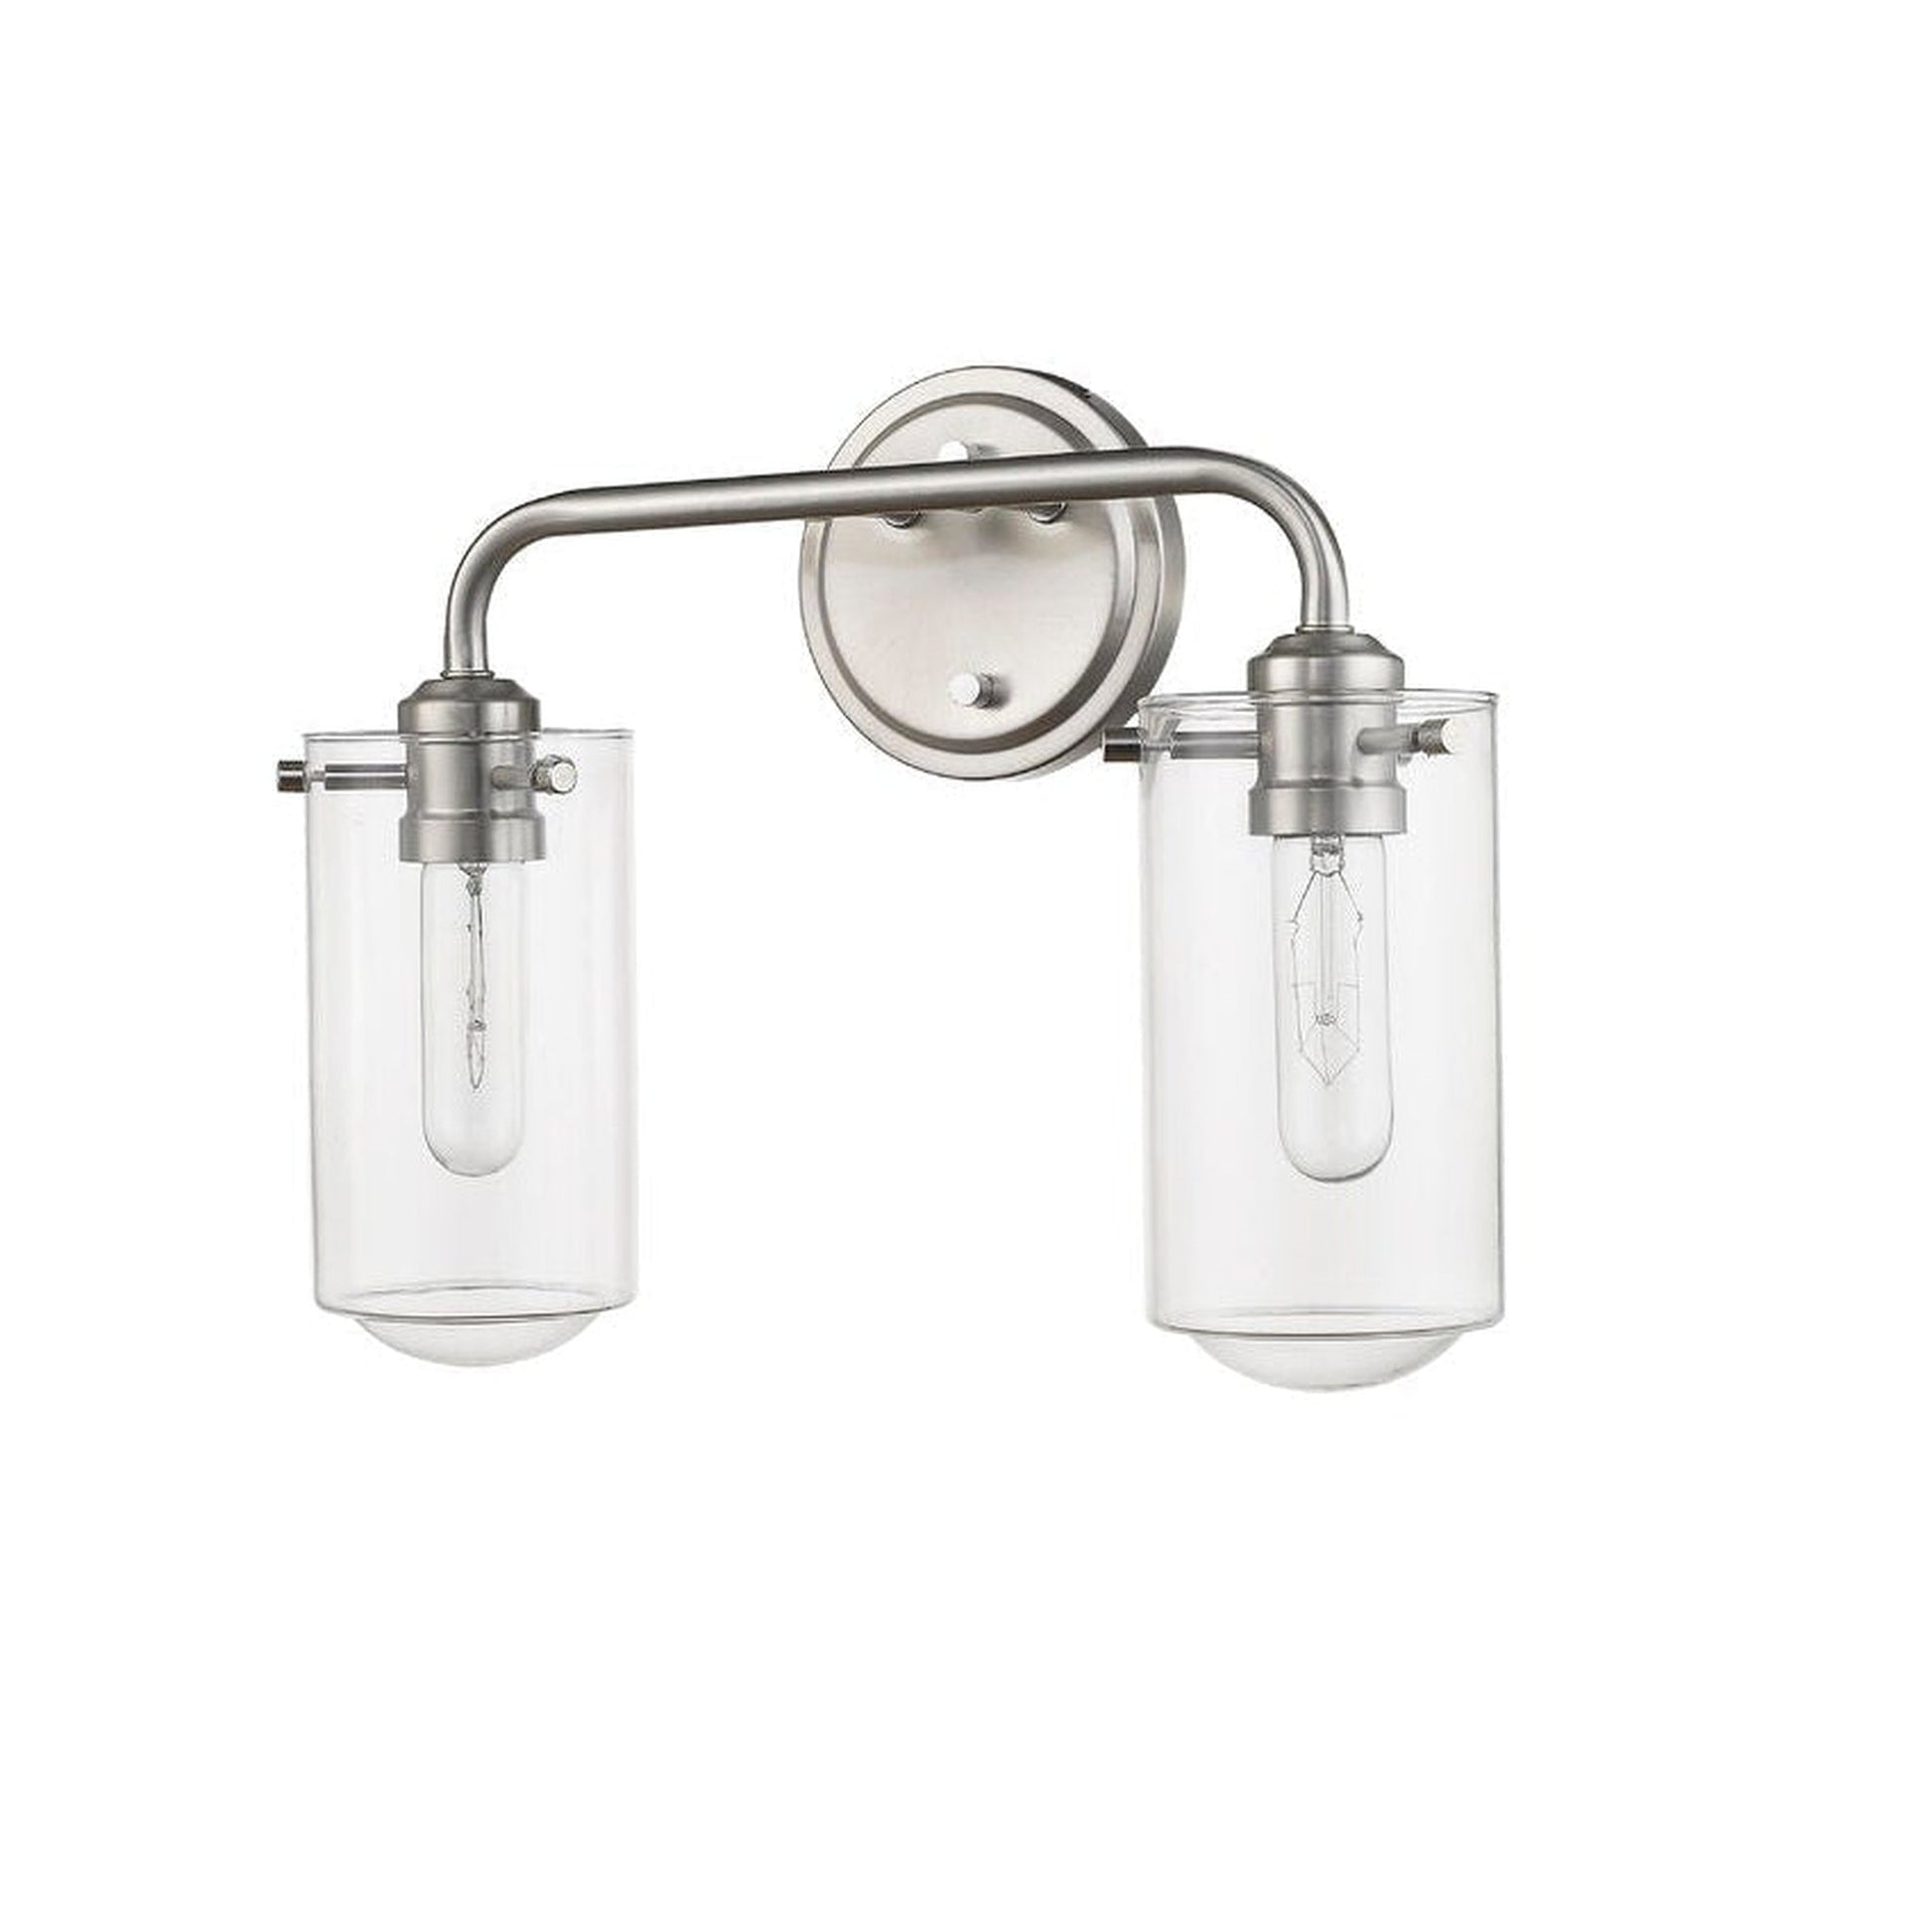 Z-Lite Delaney 15" 2-Light Brushed Nickel Vanity Light With Clear Glass Shade